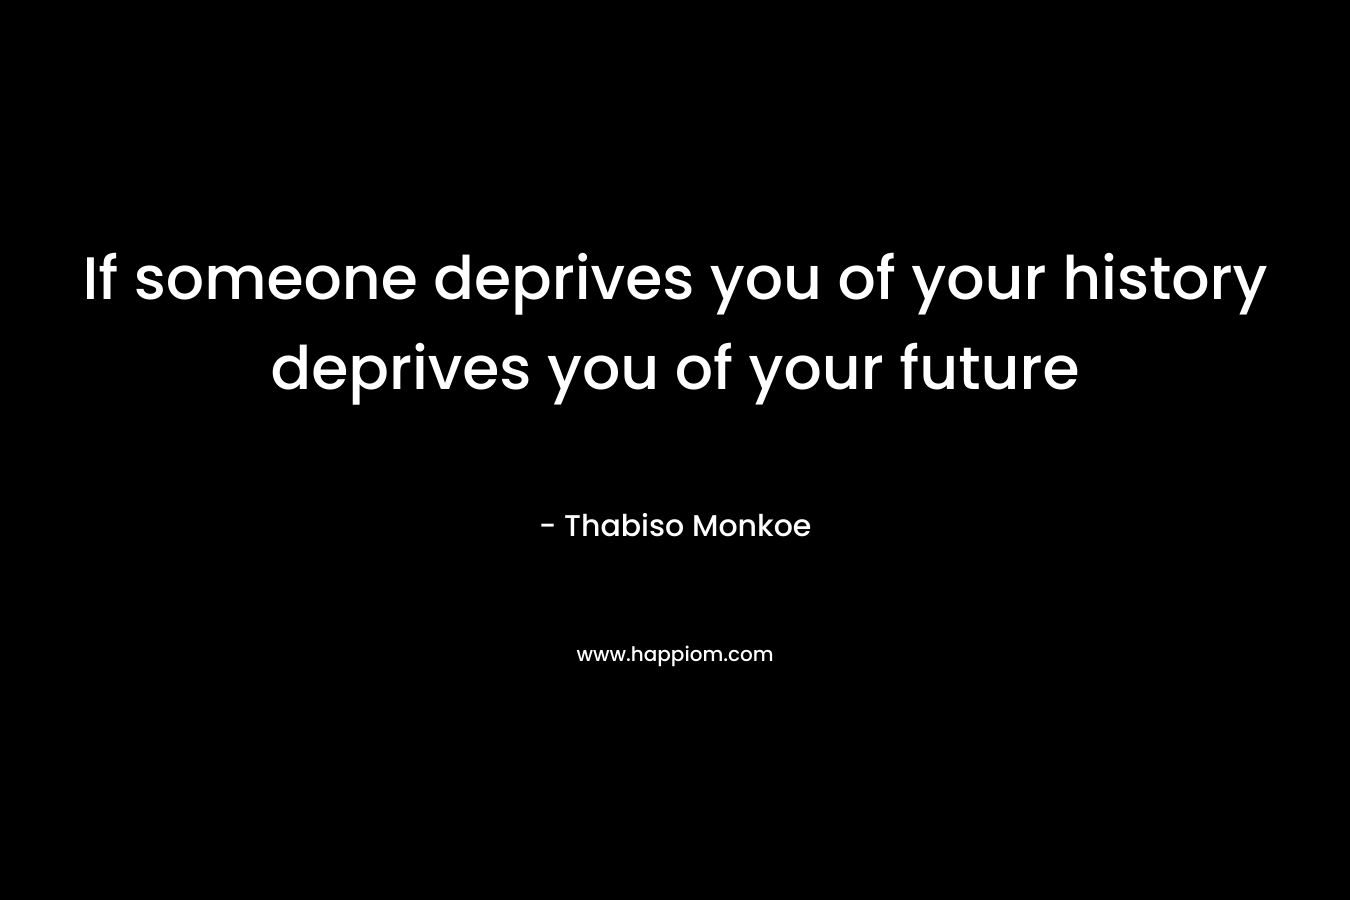 If someone deprives you of your history deprives you of your future – Thabiso Monkoe